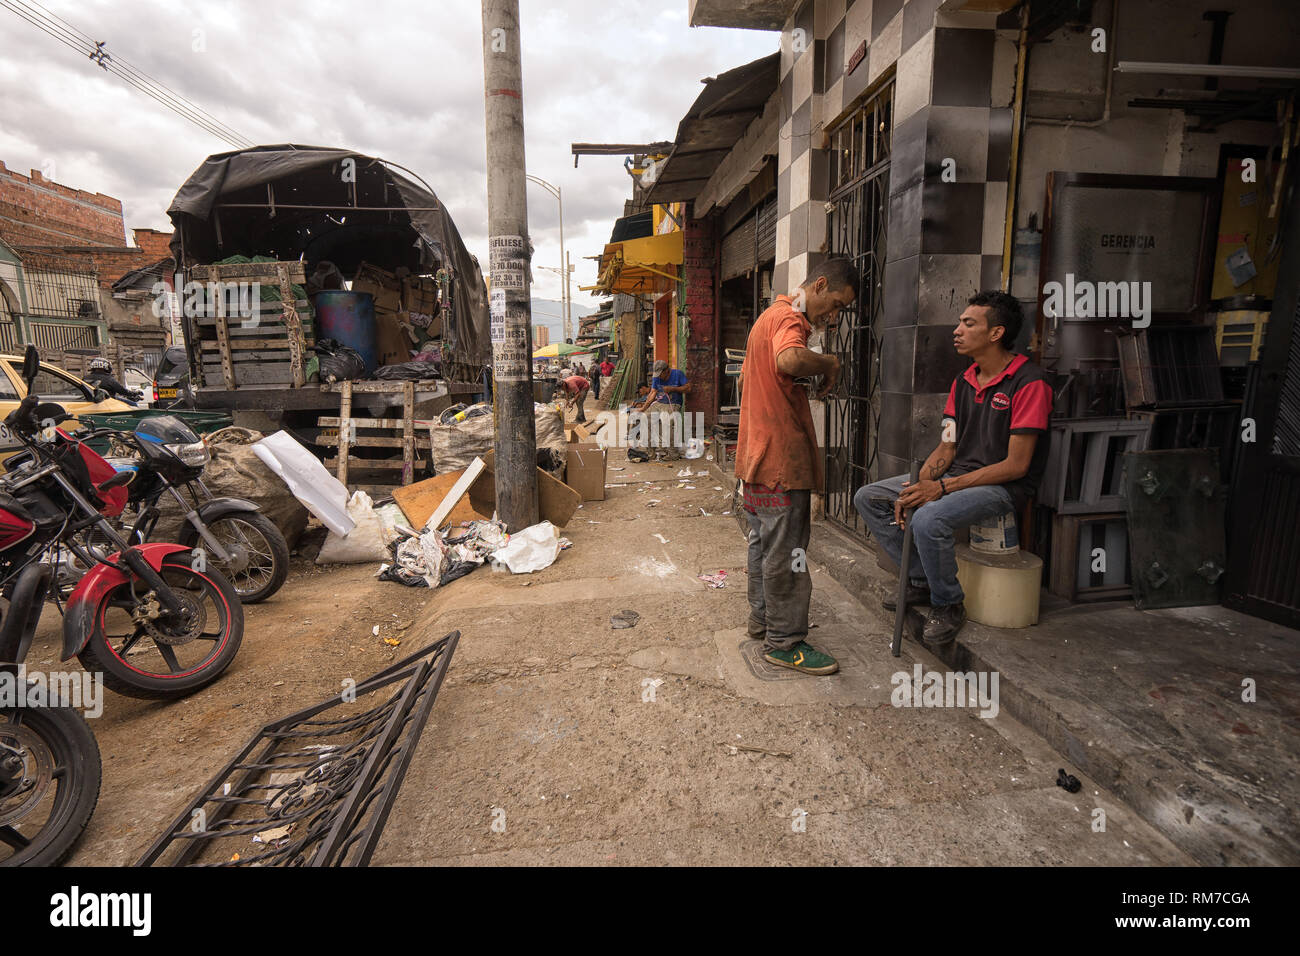 Medellin, Colombia - July 26, 2018: men working in a welding shop set up on the street Stock Photo